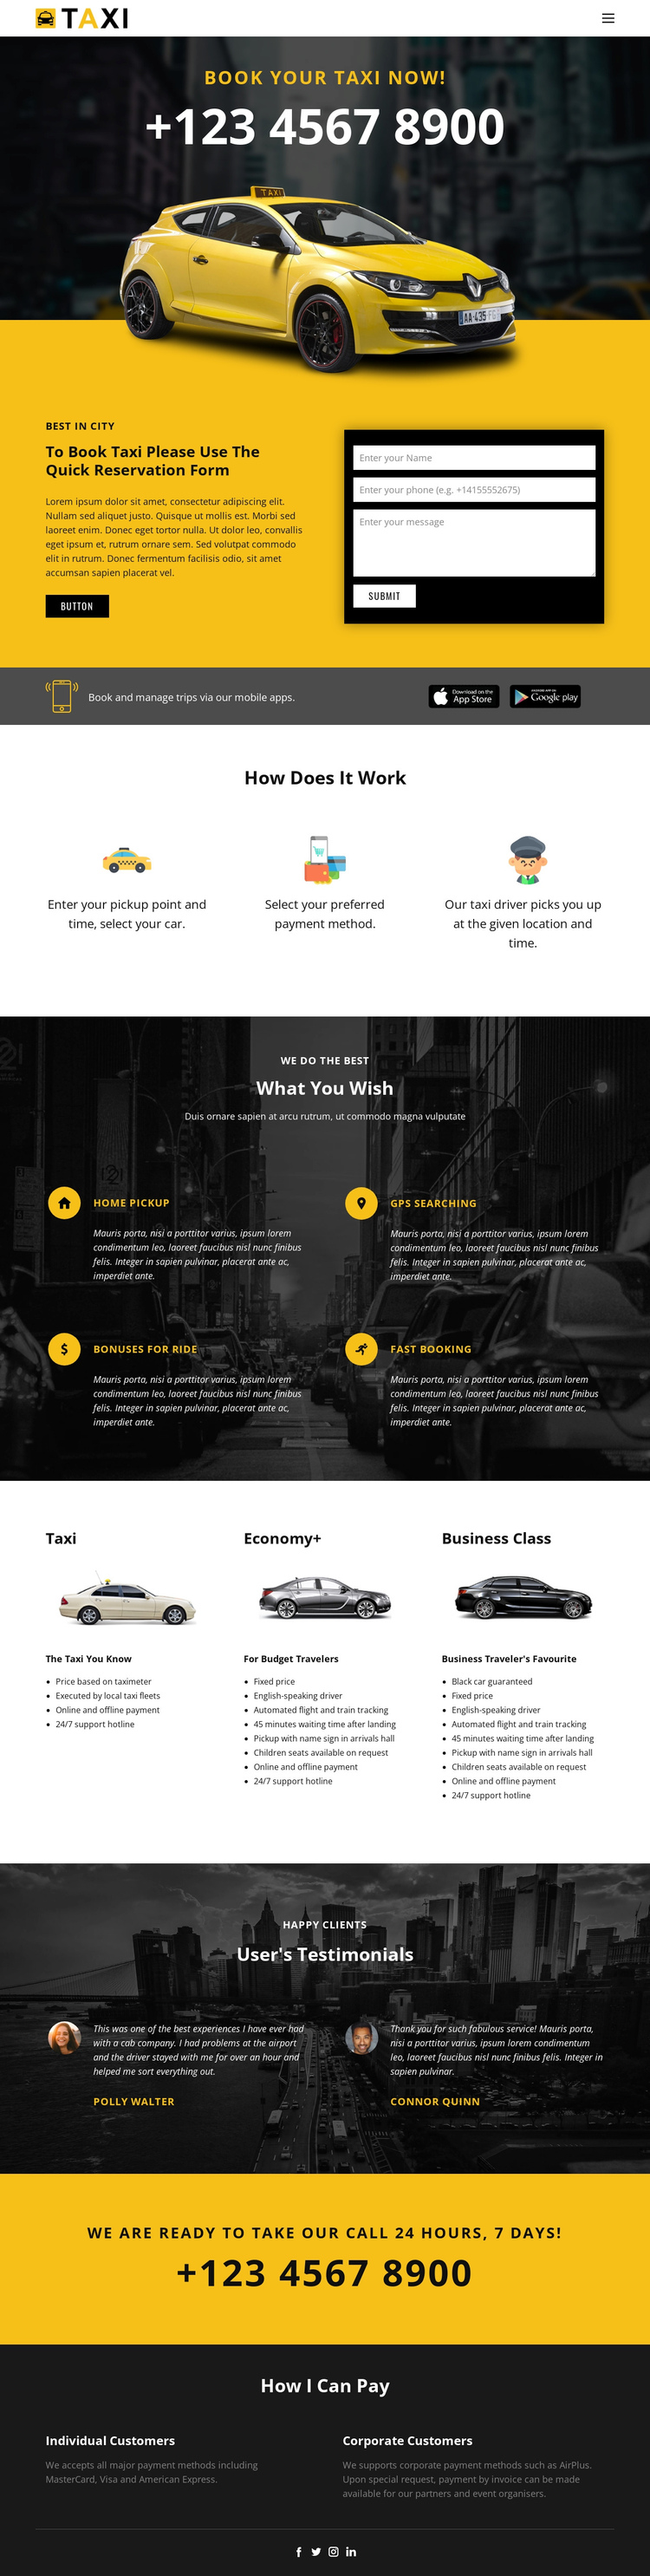 Fastest taxi cars Website Builder Software